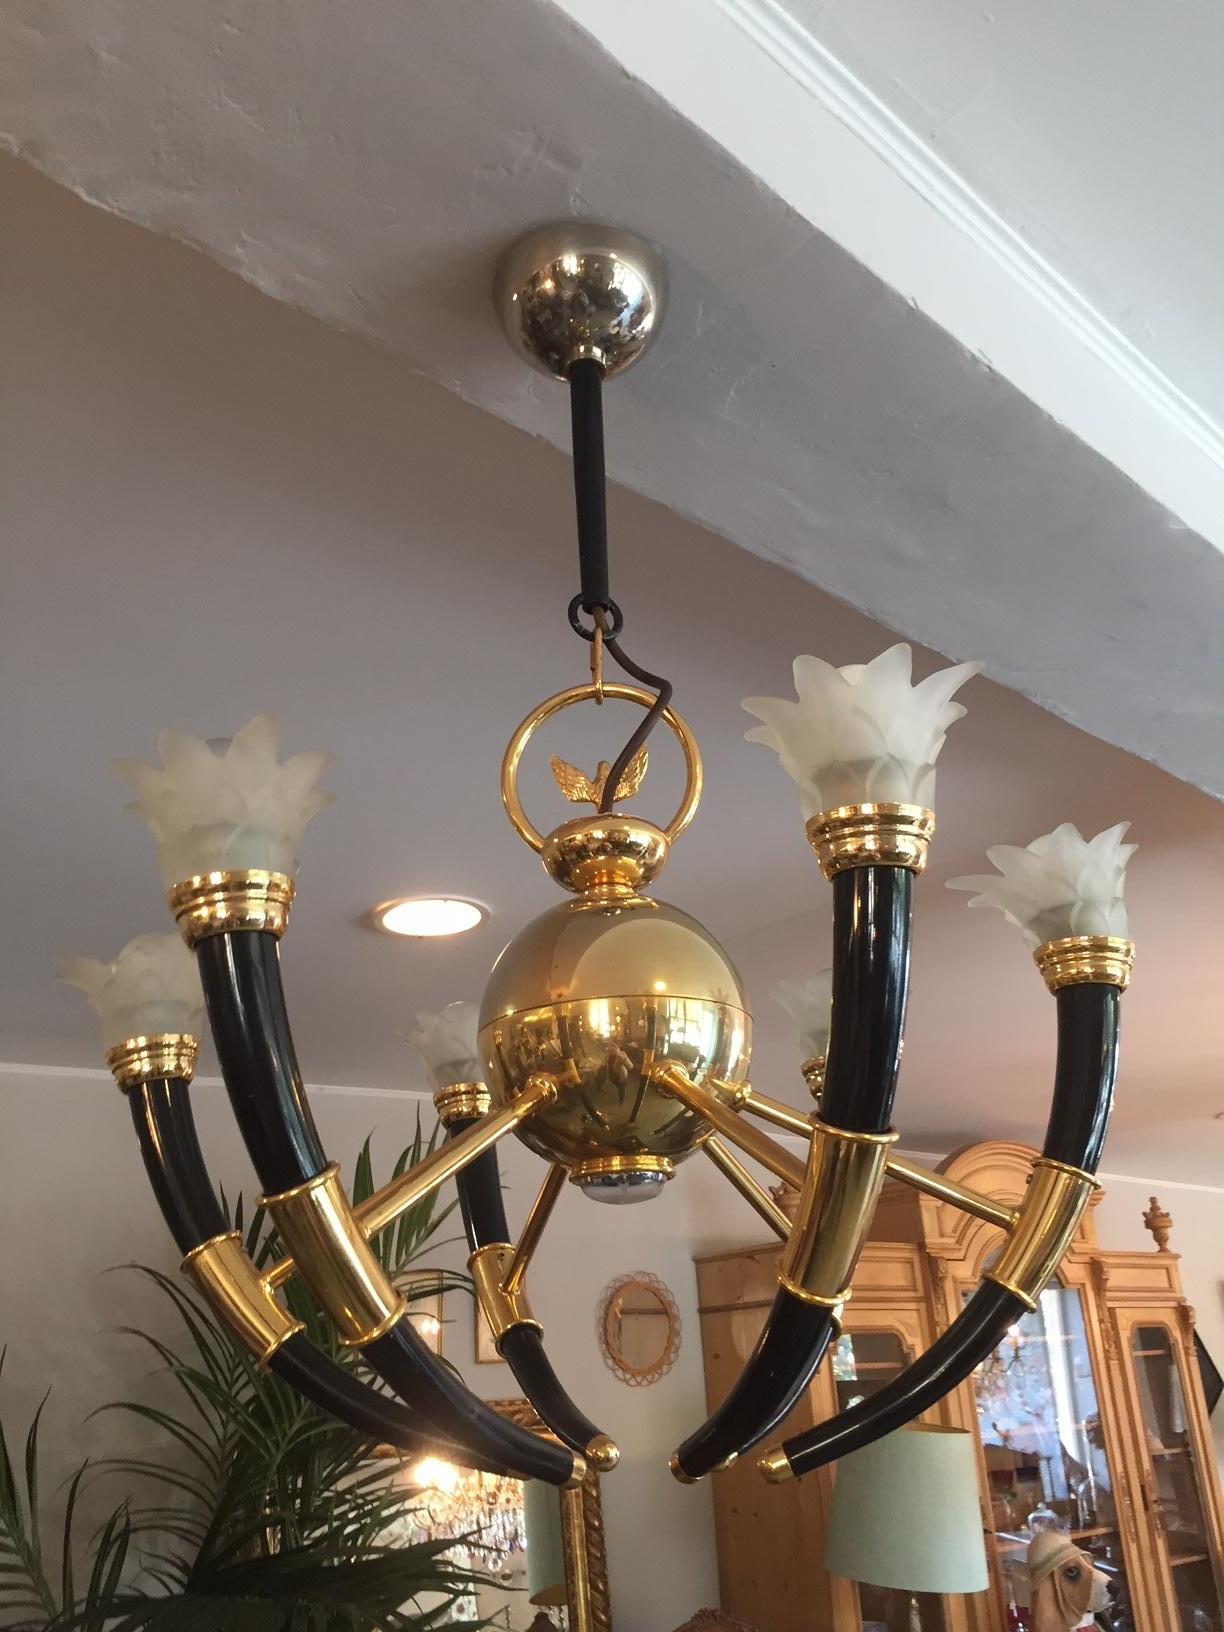 Rare and beautiful 20th century gilted brass and glass flowers chandelier from the 1970s.
At the center of the chandelier you will find a brass ball that have a light at the extremity. At the top of the chandelier there is a beautiful brass eagle.